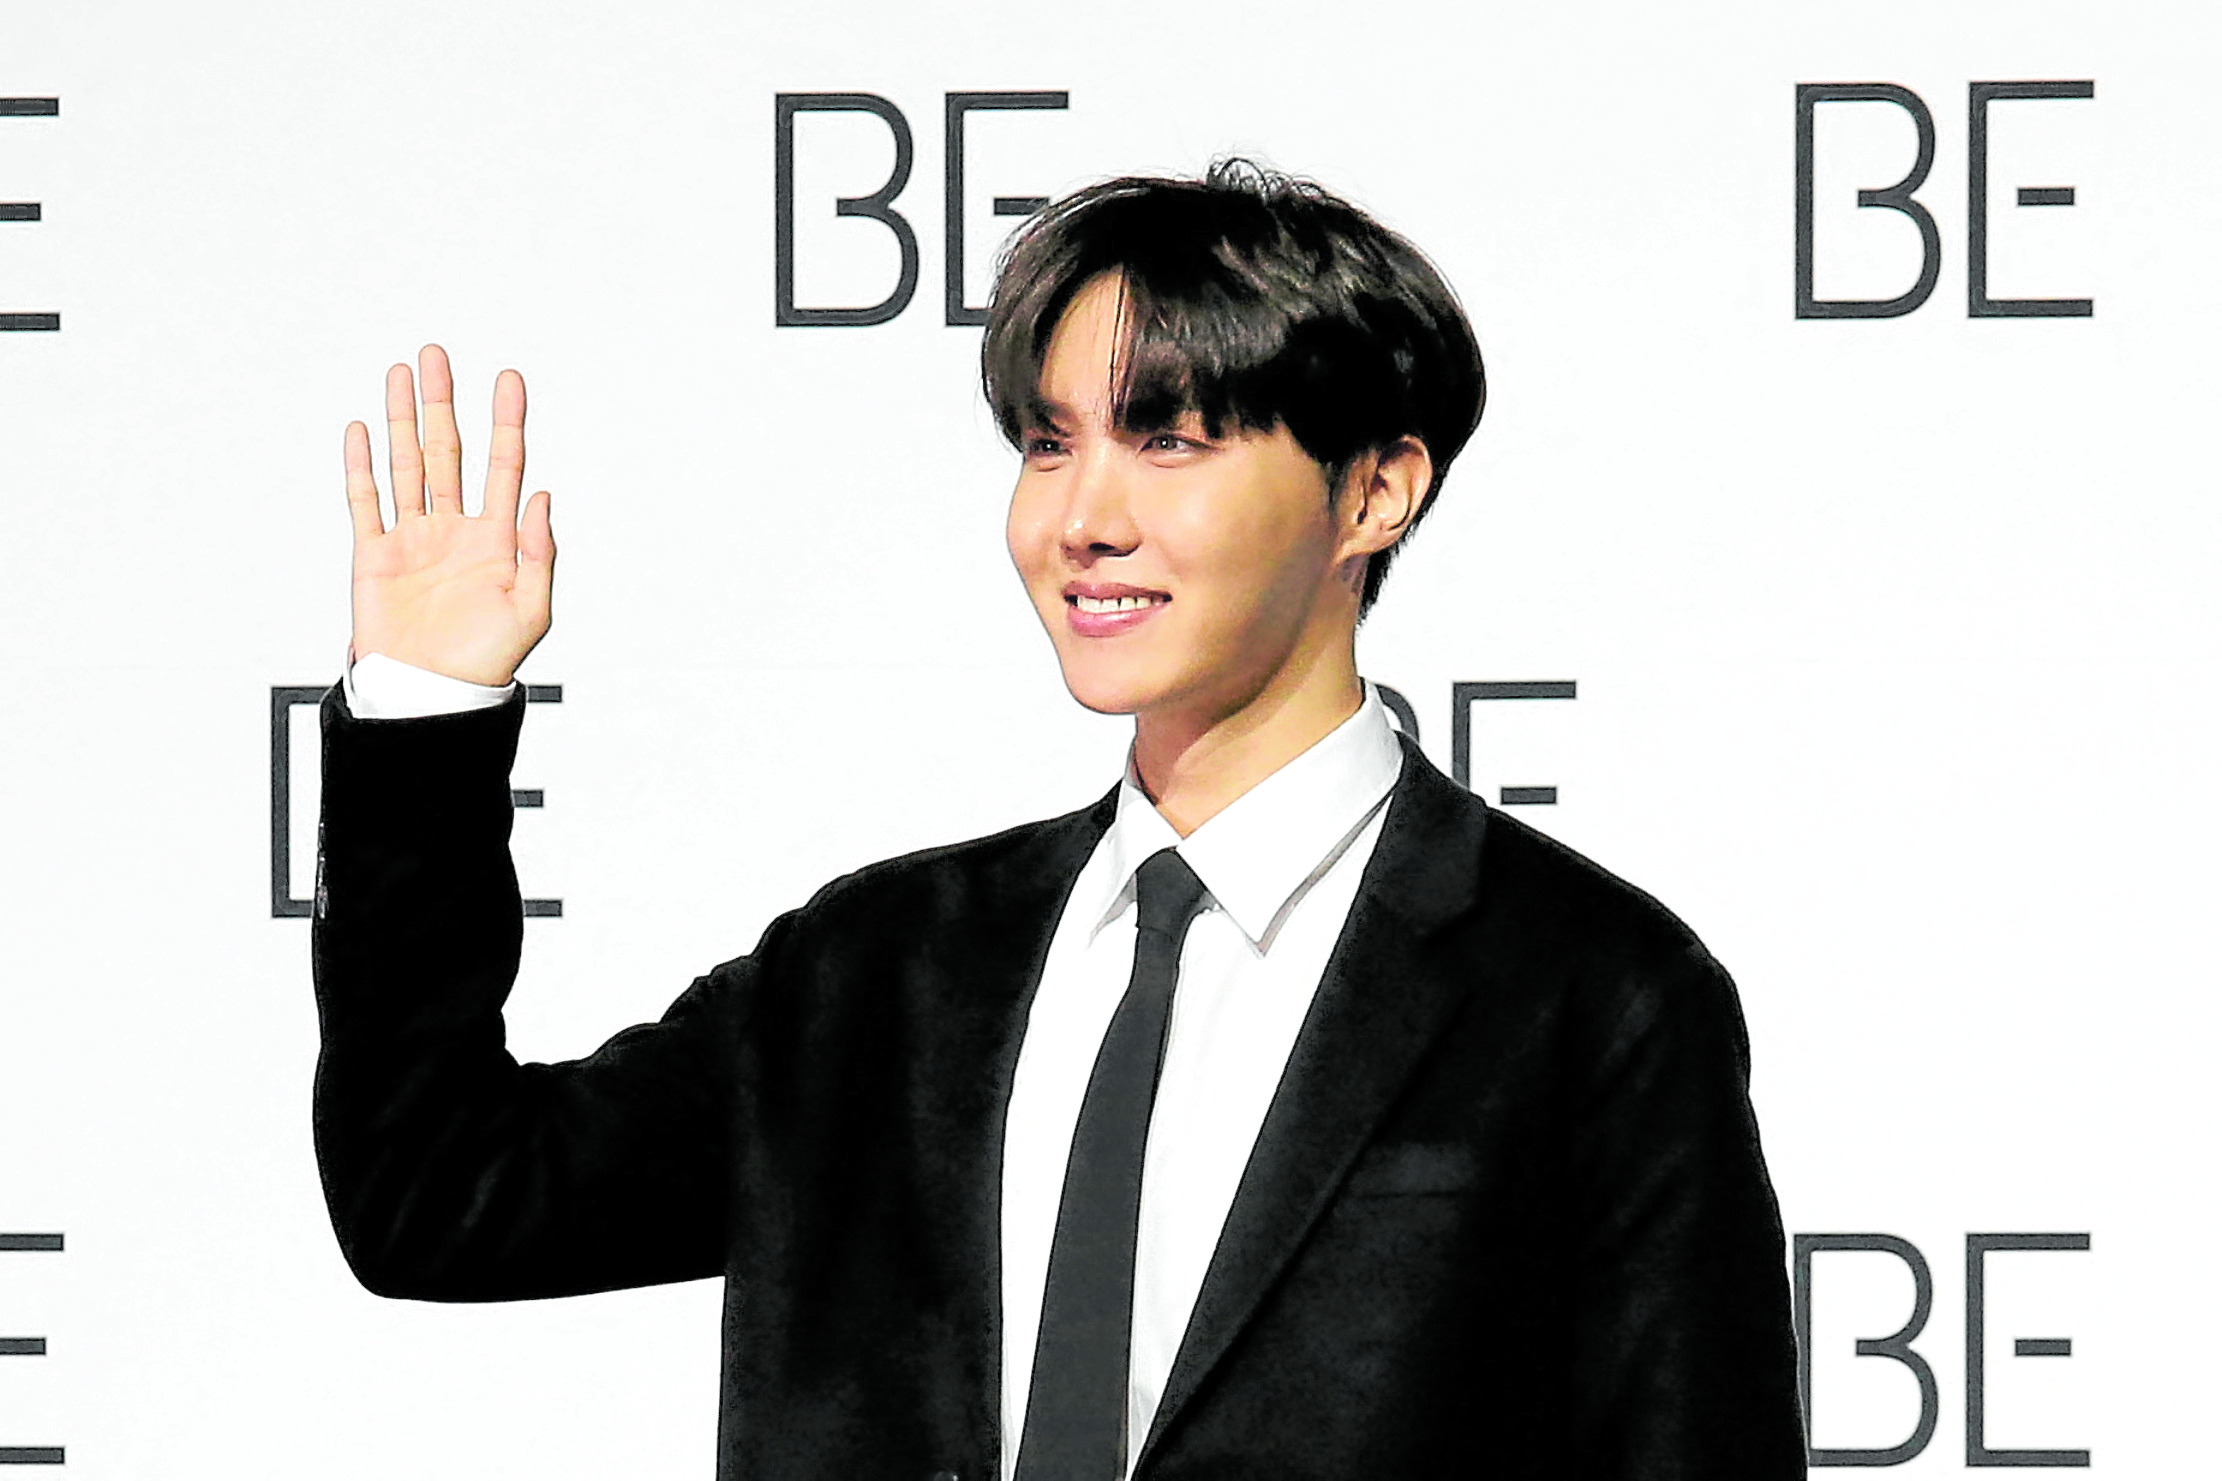 BIGHIT MUSIC confirms BTS' j-hope has initiated the military